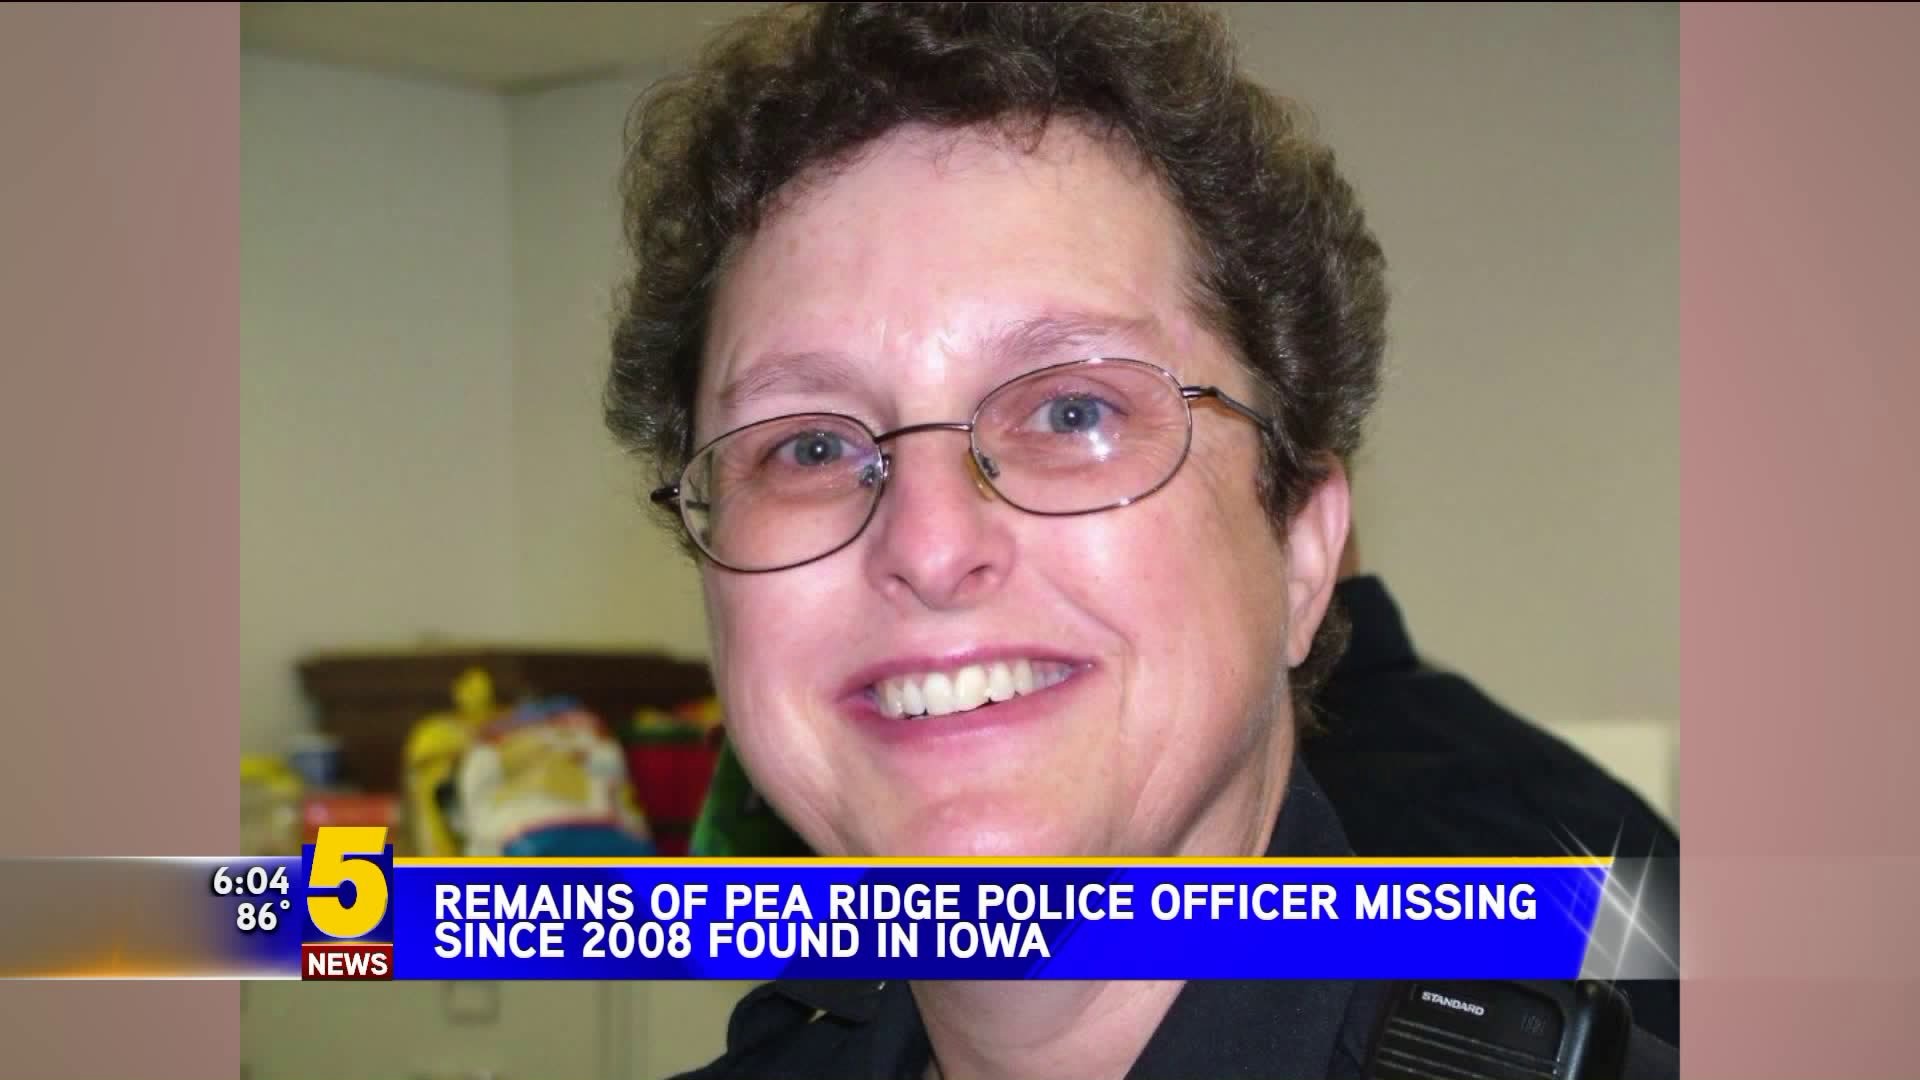 Remains Of Pea Ridge Police Officer Missing Since 2008 Found In Iowa